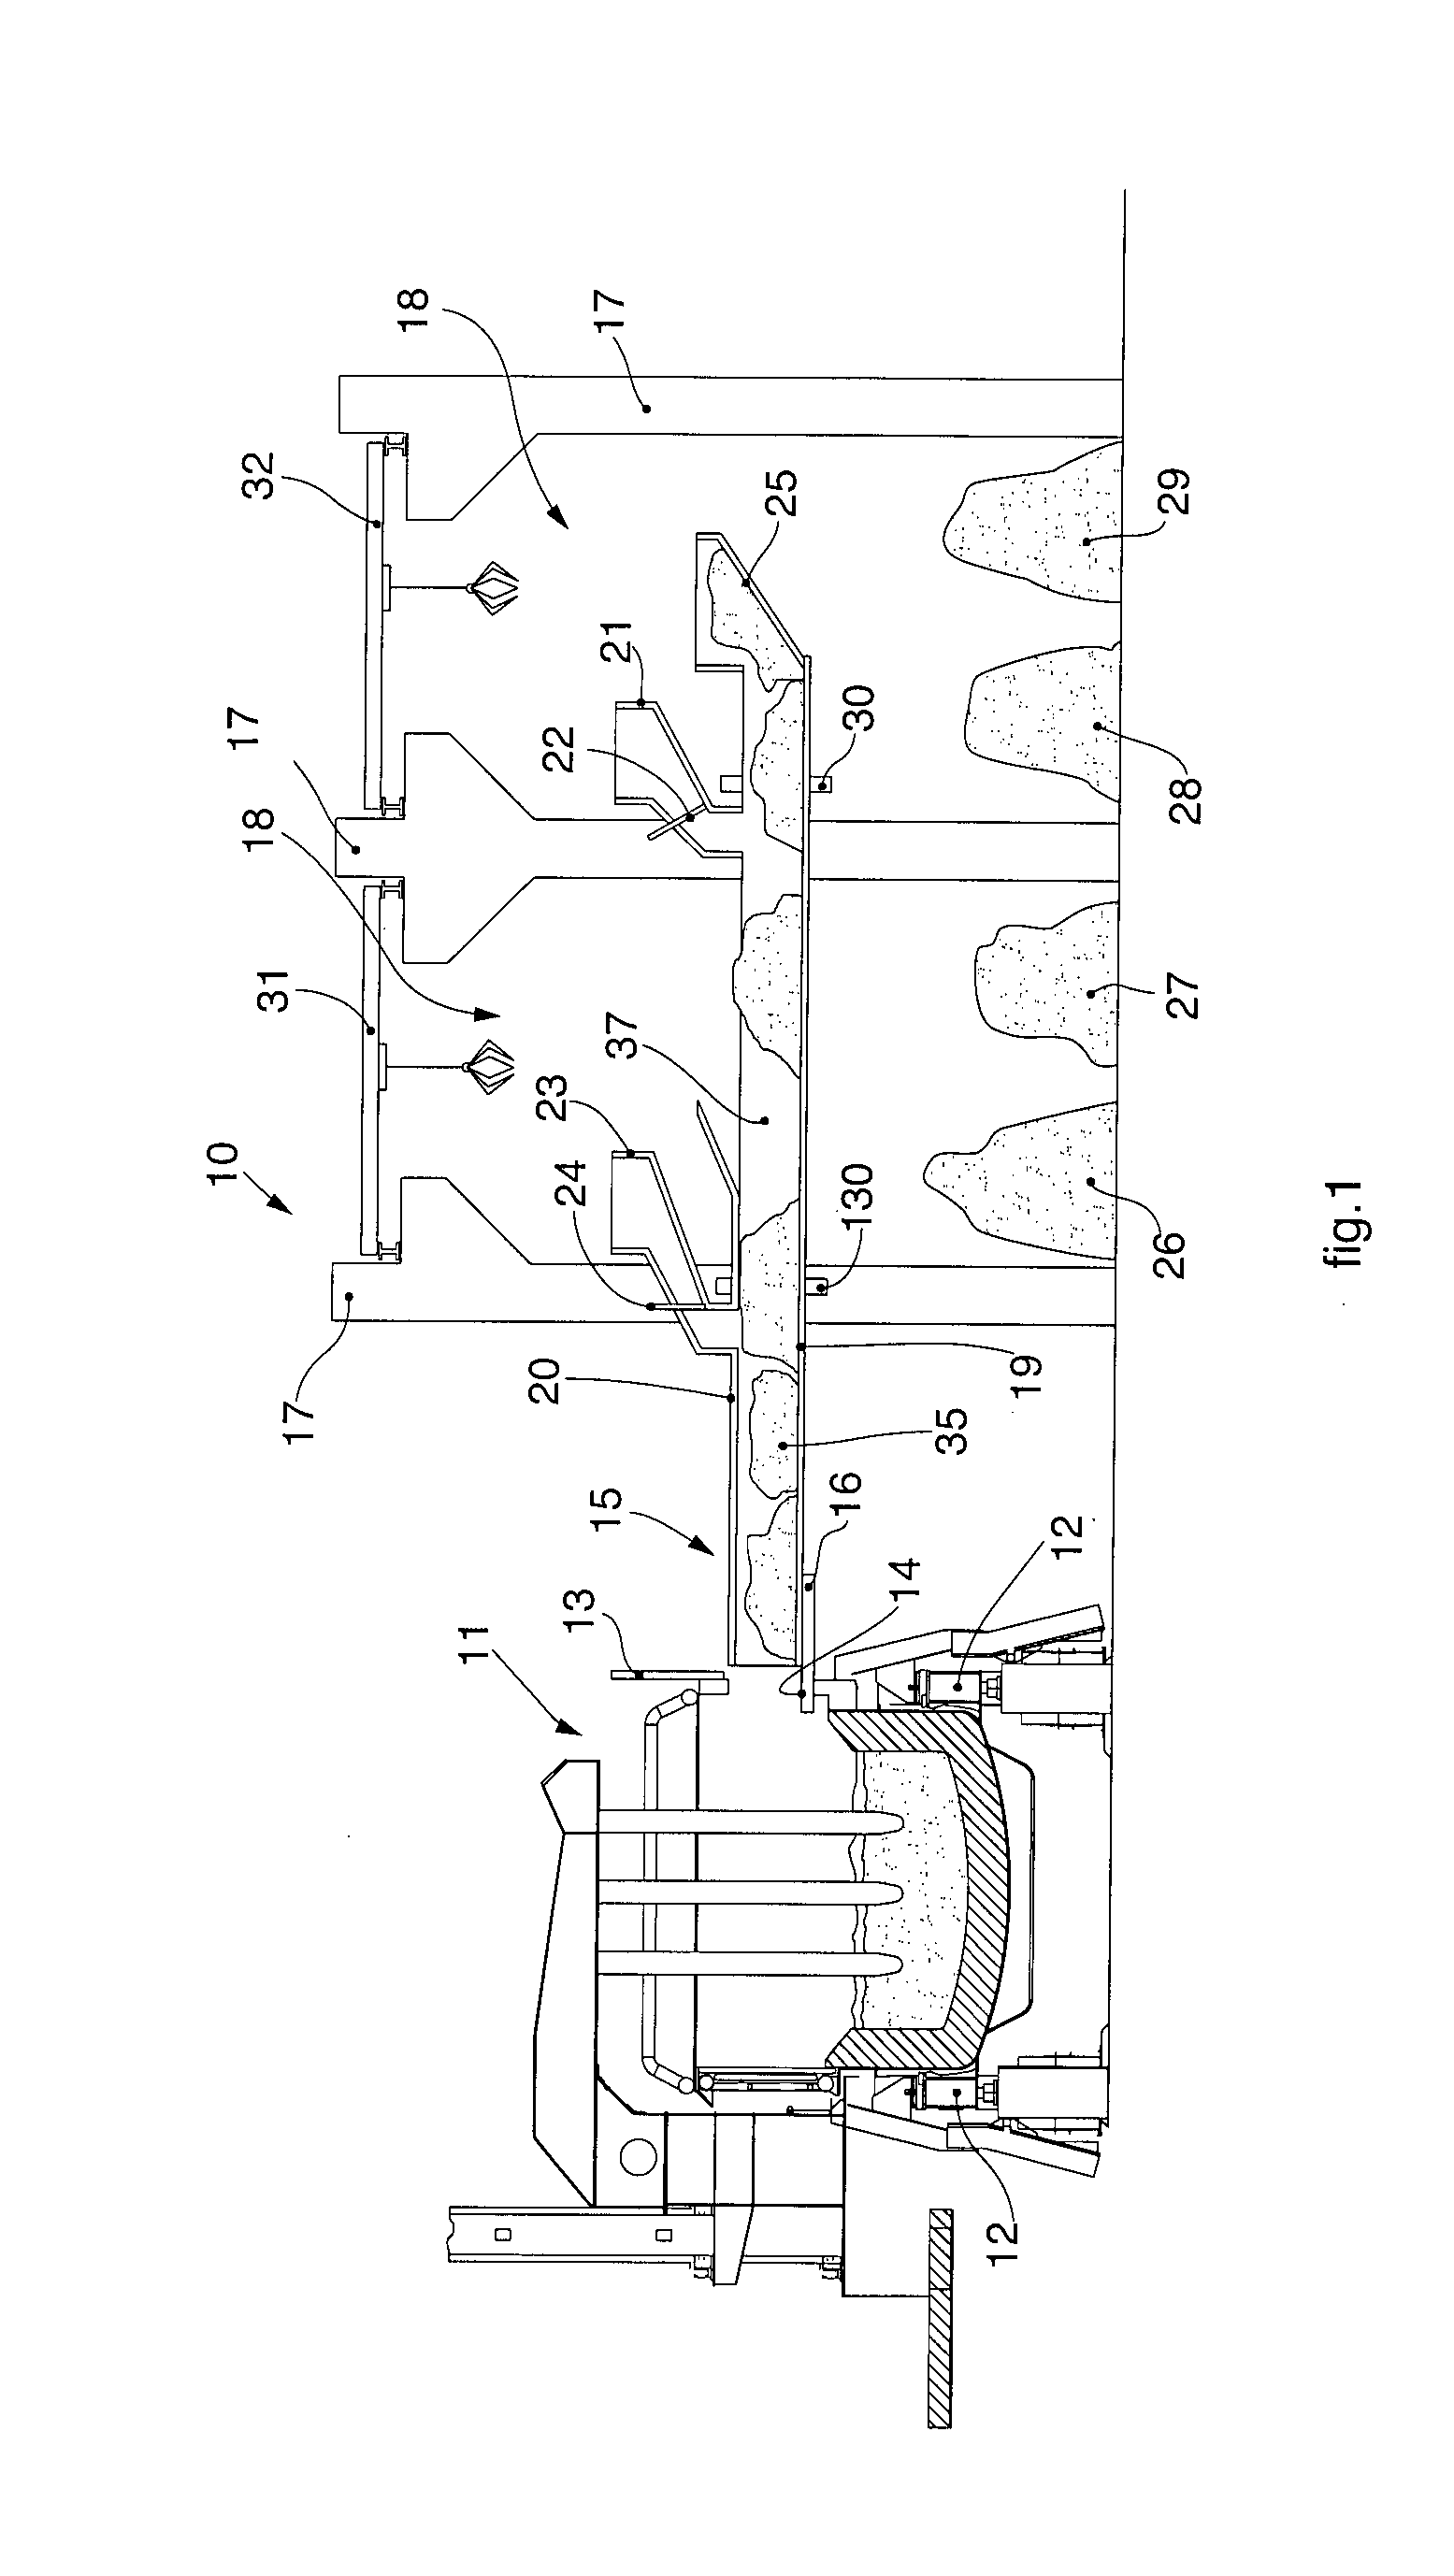 Device and method to control the charge in electric arc furnaces